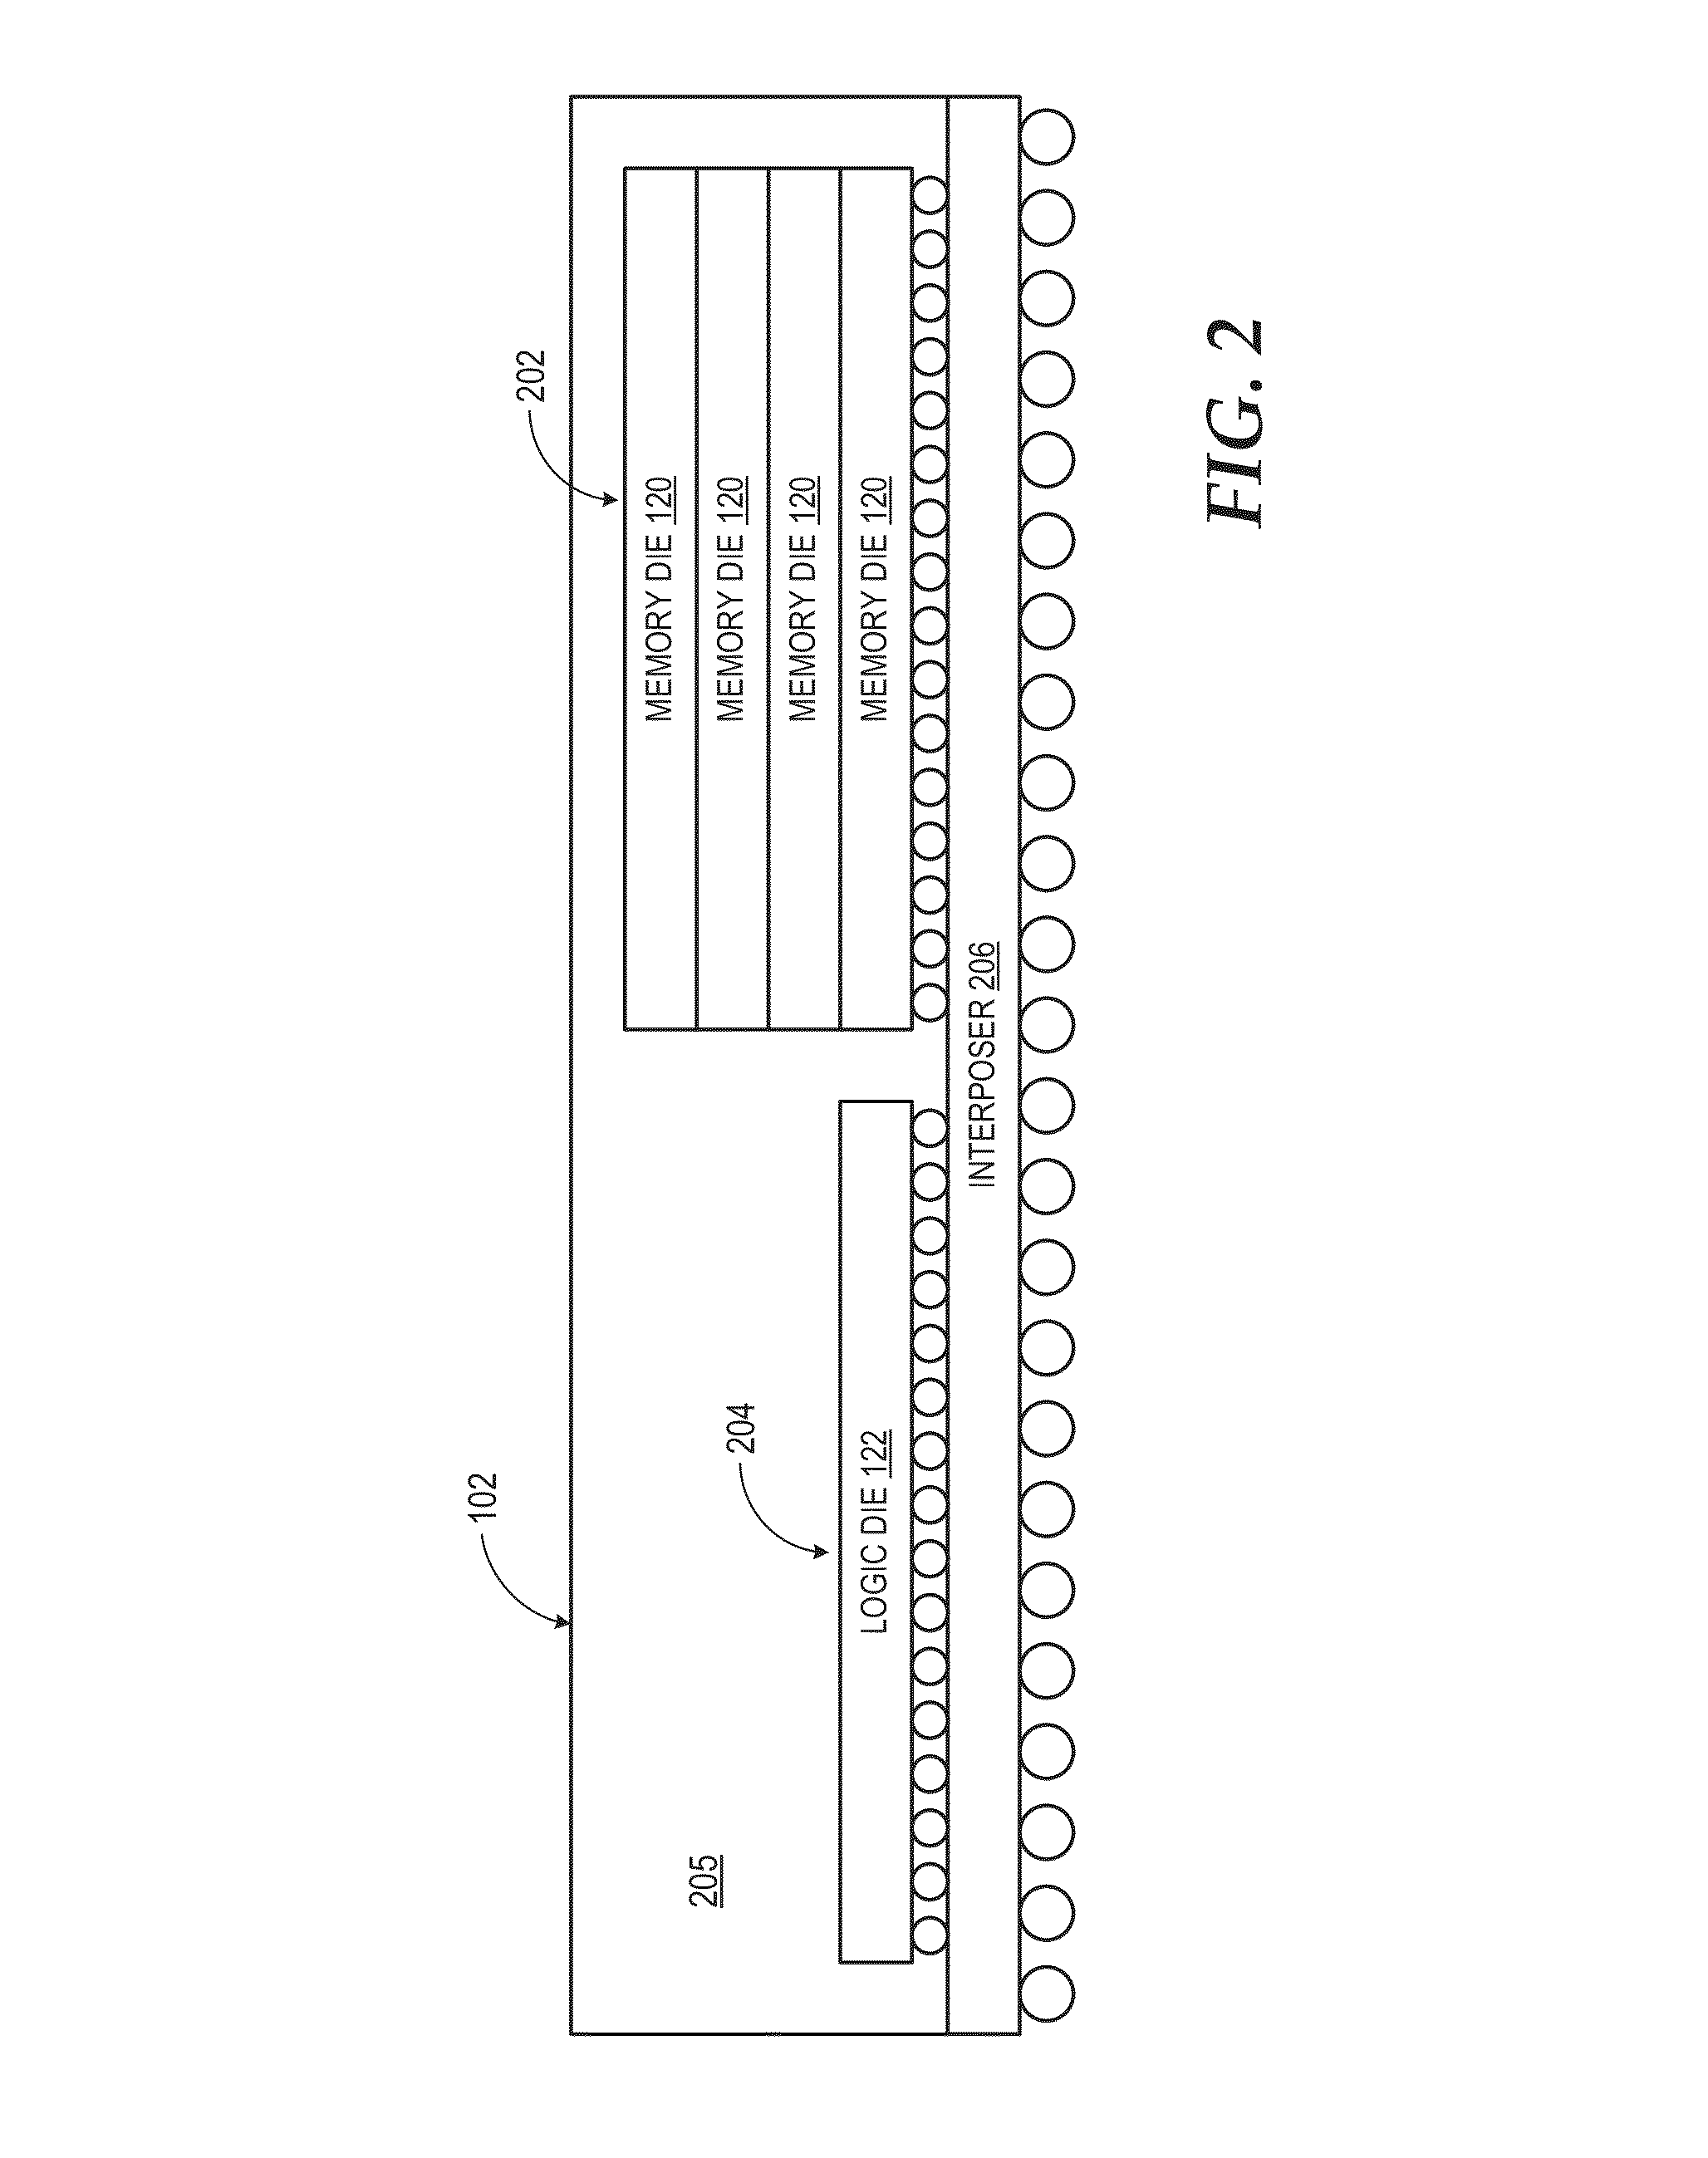 Die-stacked memory device with reconfigurable logic